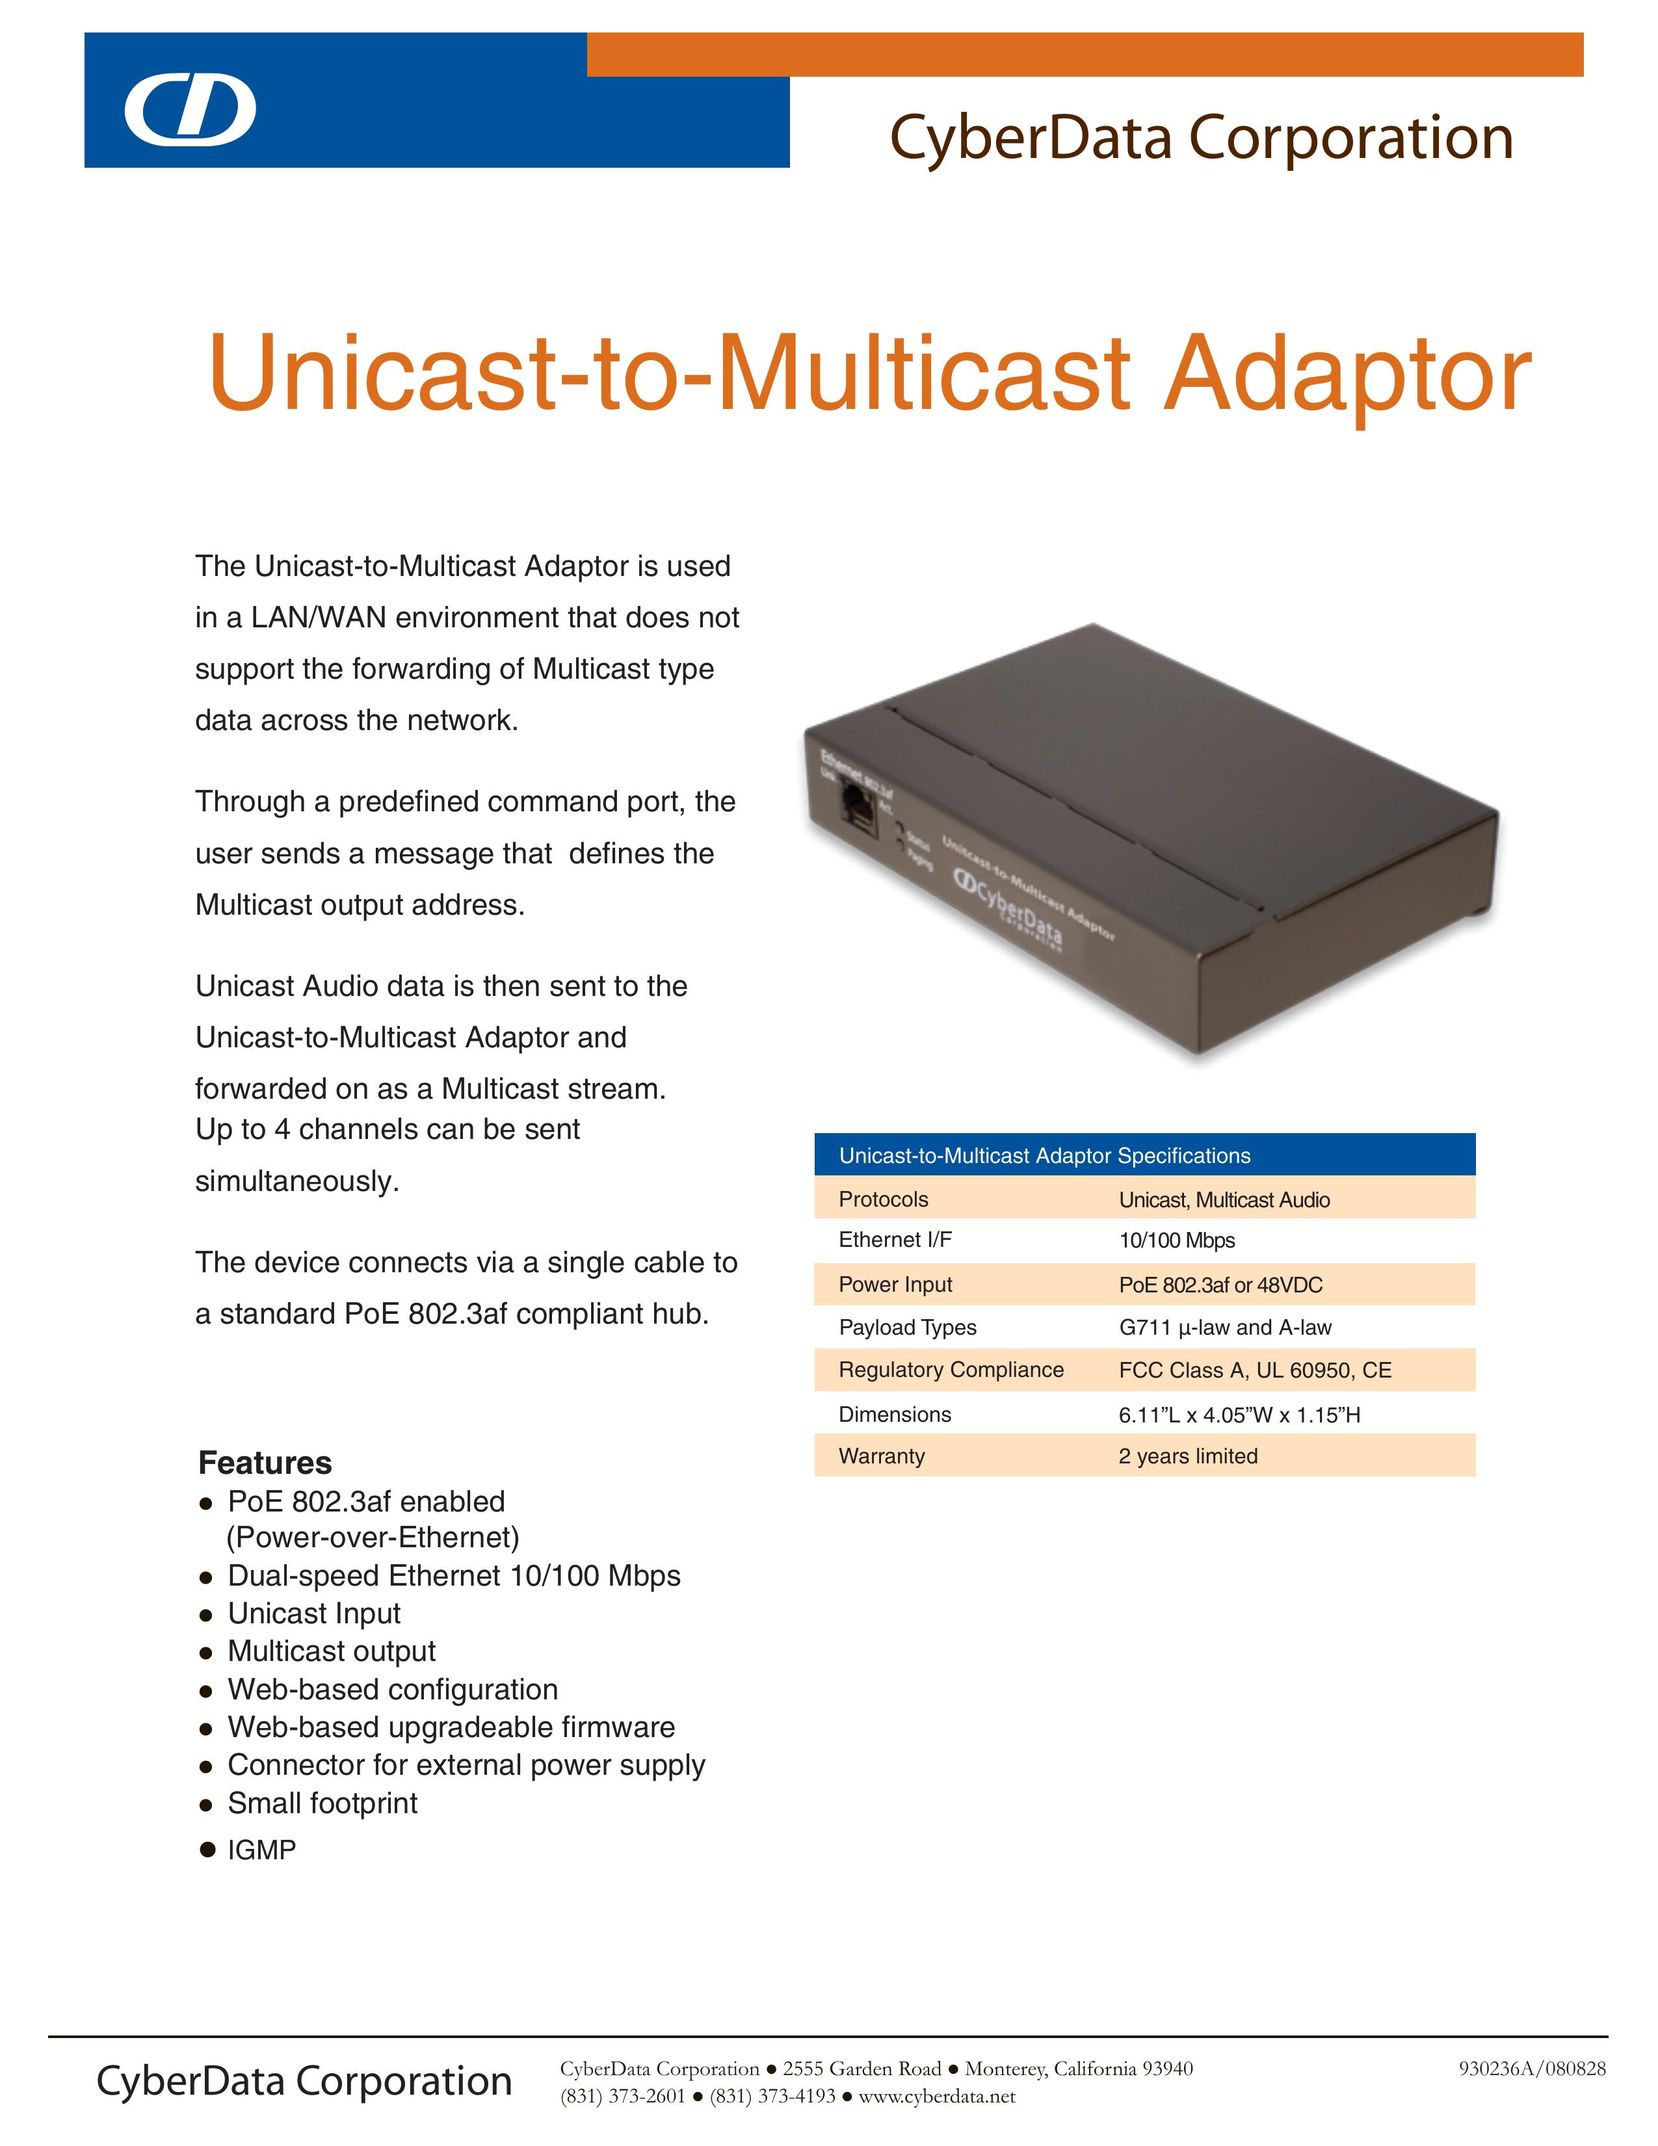 CyberData Unicast-to-Multicast Adaptor Network Card User Manual